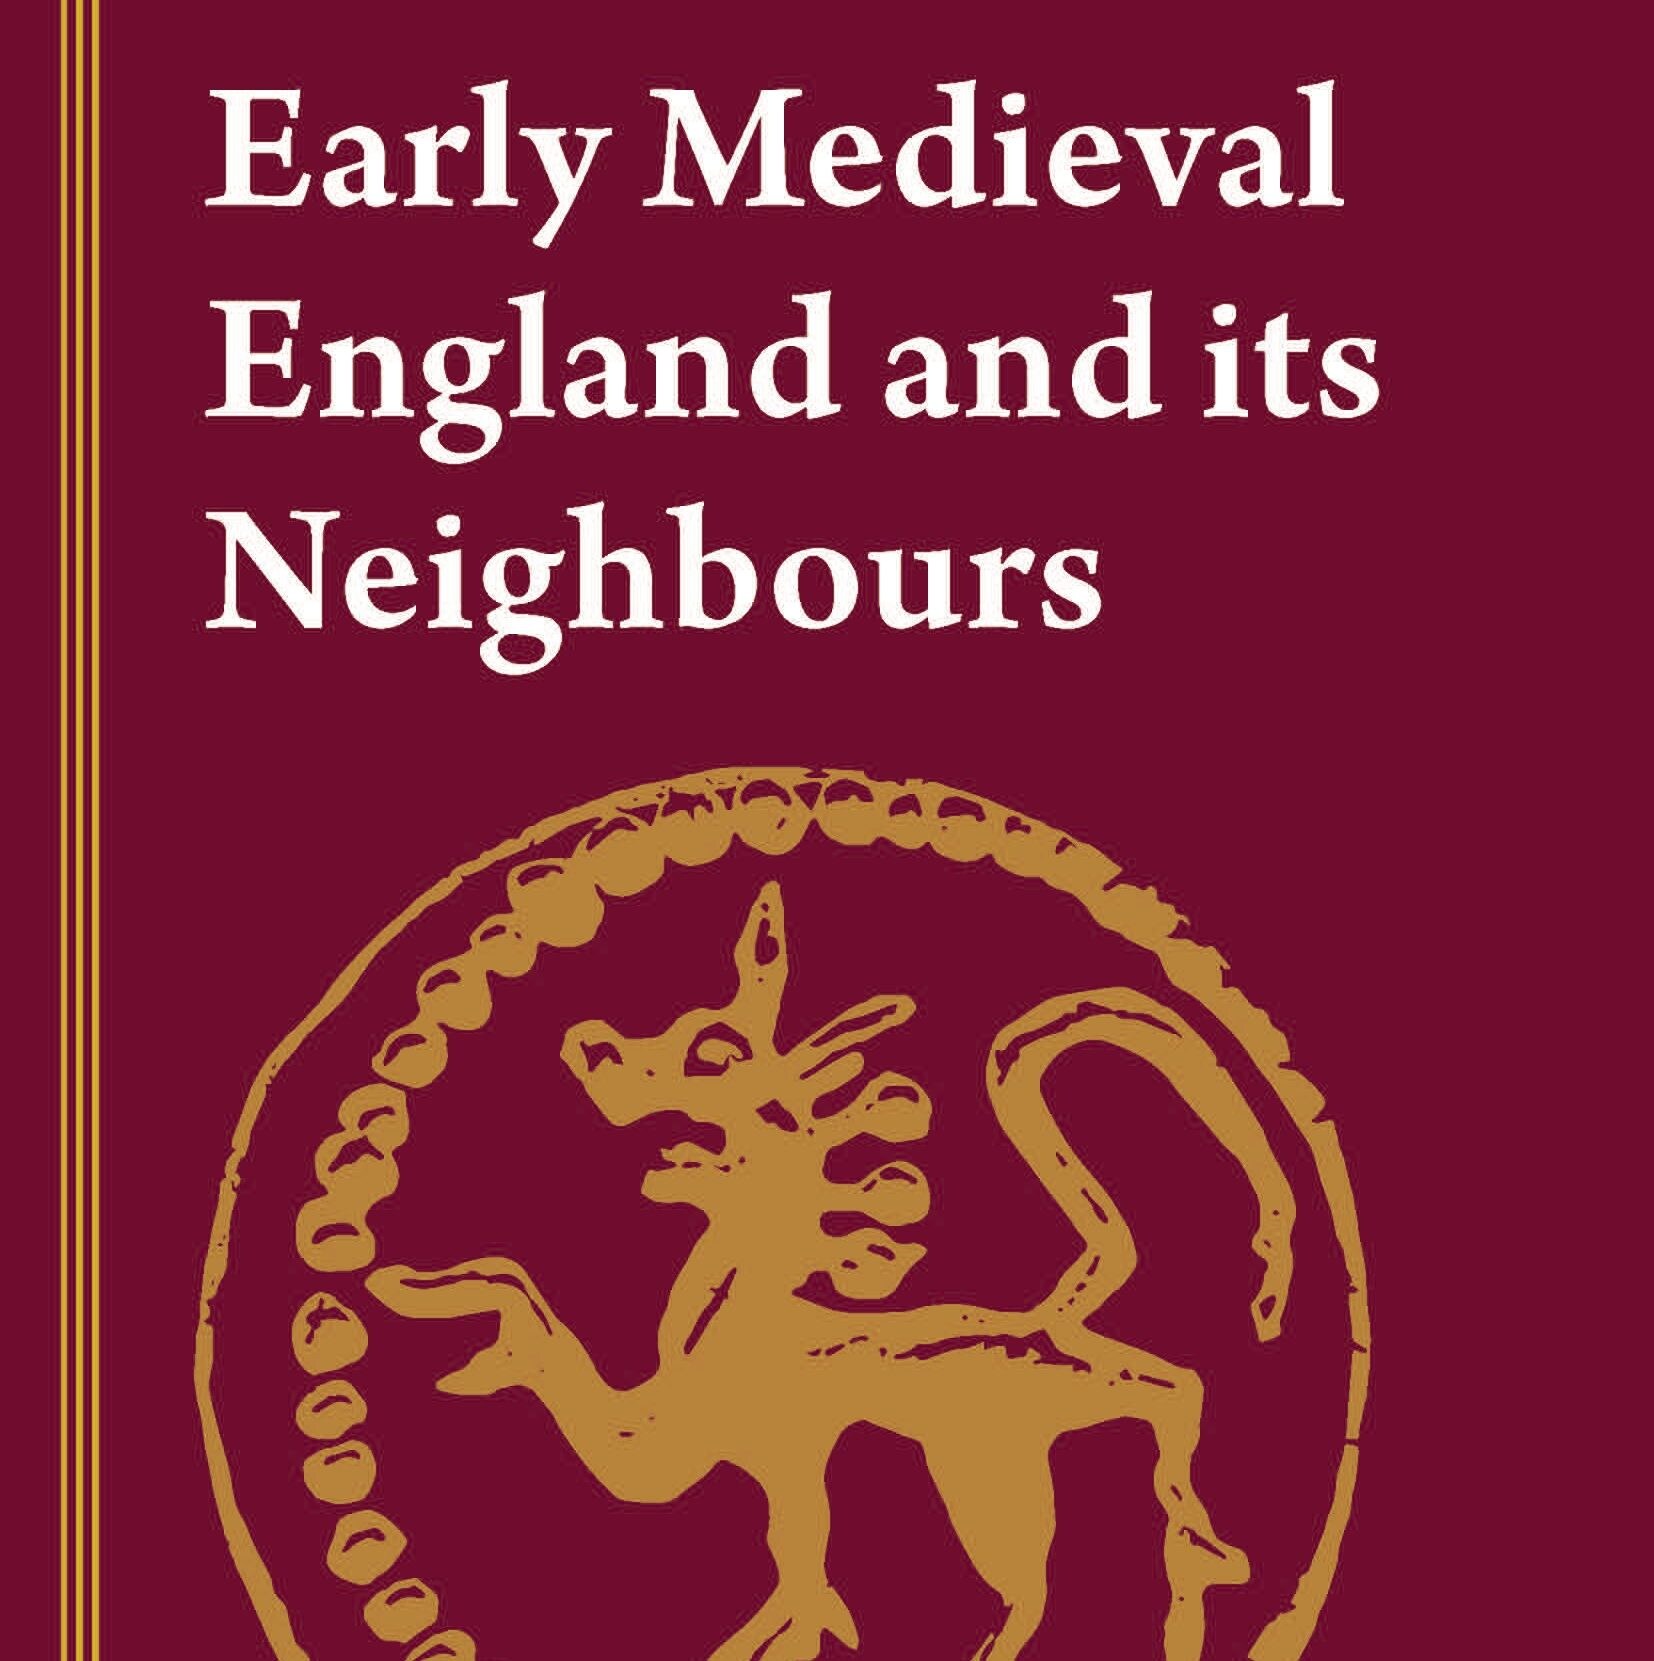 cambridge journal ‘pandering to mad americans’ by ditching anglo-saxon from title